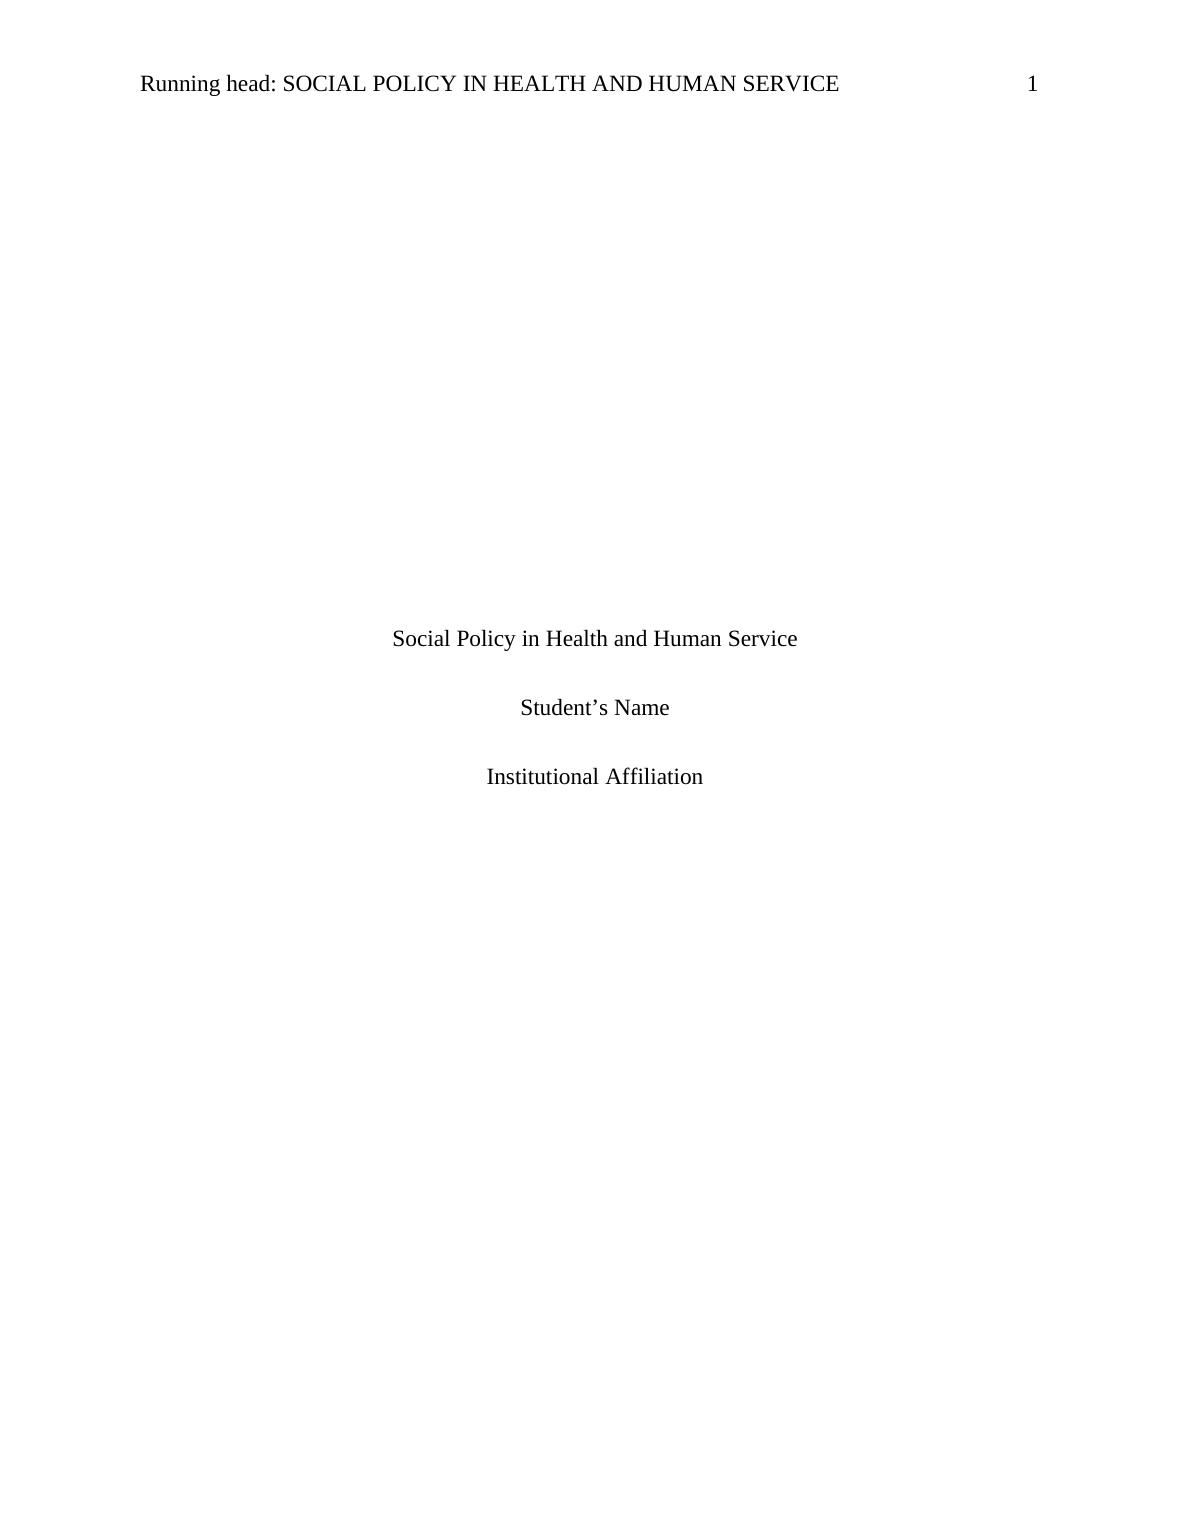 Social Policy in Health and Human Service_1